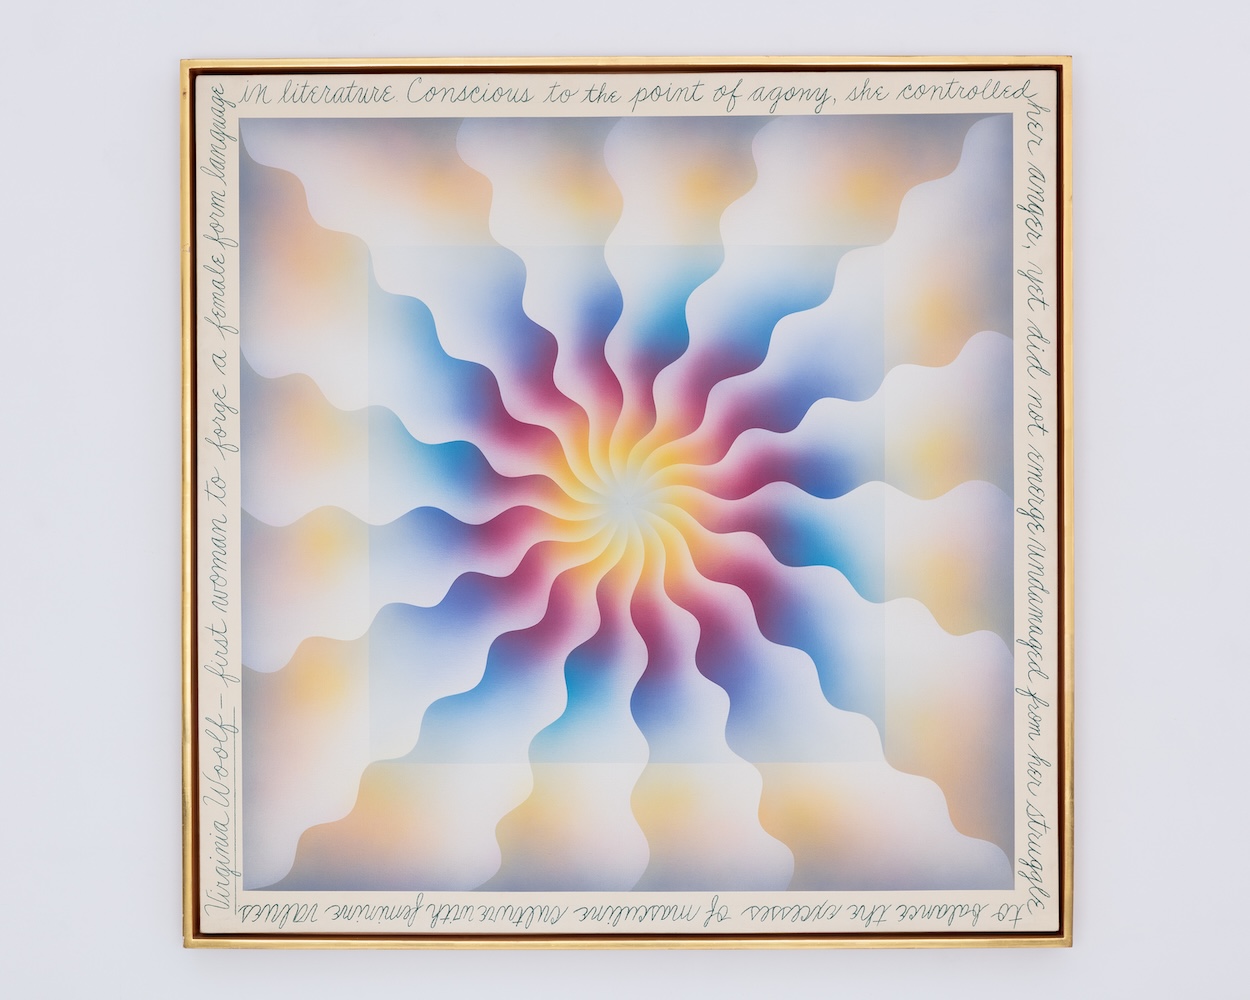 Judy Chicago, Virginia Woolf, from The Reincarnation Triptych, 1973. at “Judy Chicago: Herstory” New Museum